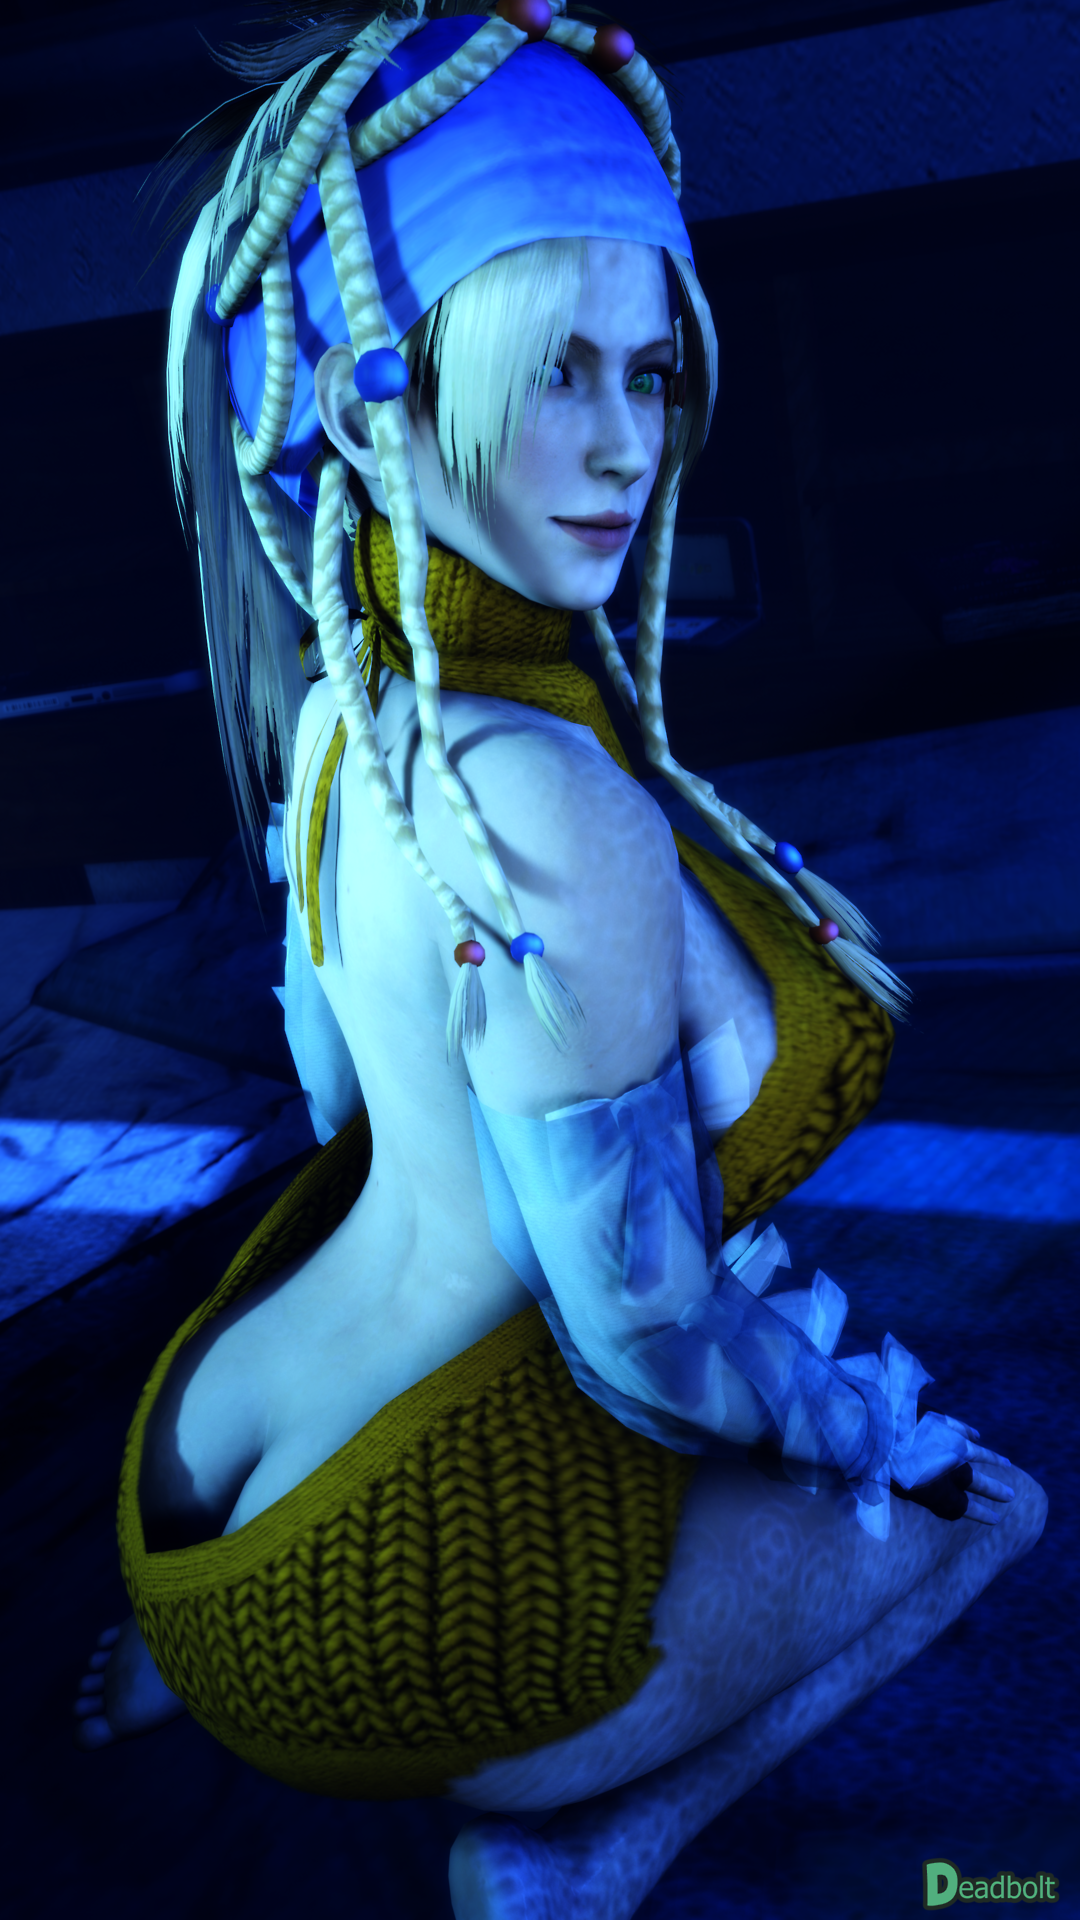 Rikku the Virgin Killer. Was quite a pain trying to fit her into it, but the payout